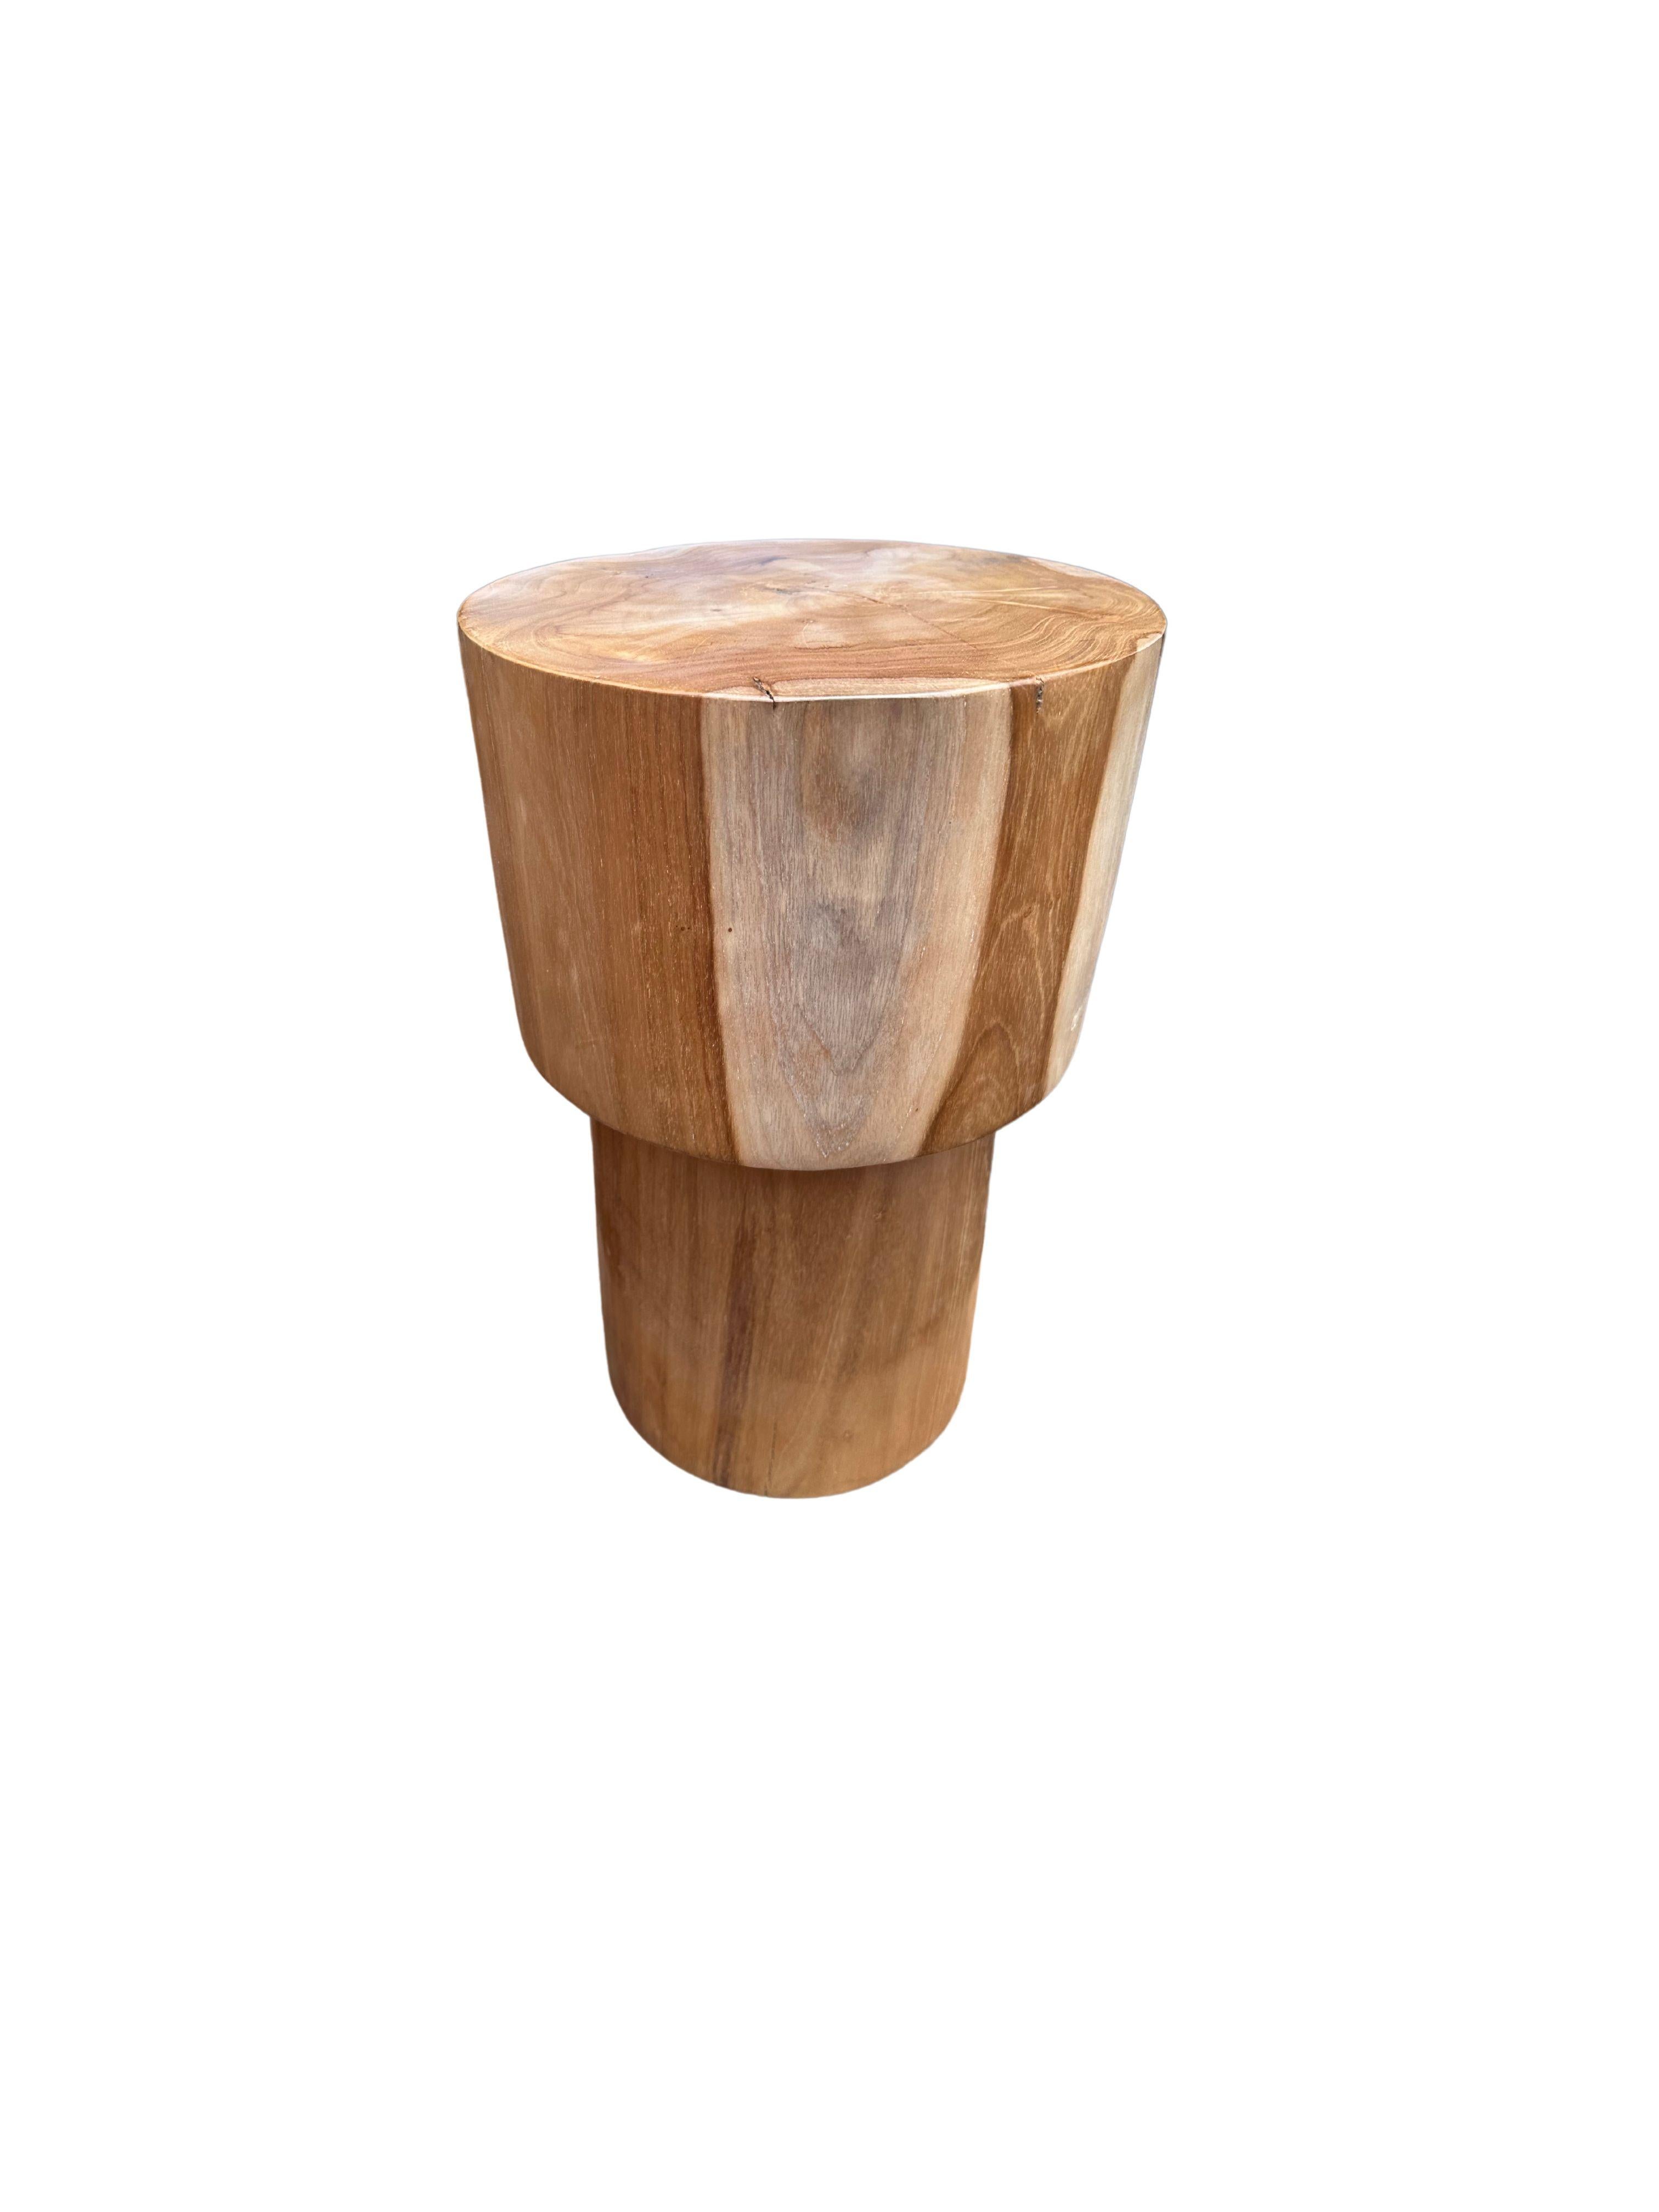 A wonderfully sculptural side table crafted from Teak Wood. Its subtly curved edges add to its charm. This table features a wonderful array of wood textures and shades. The perfect object to bring warmth to any space.